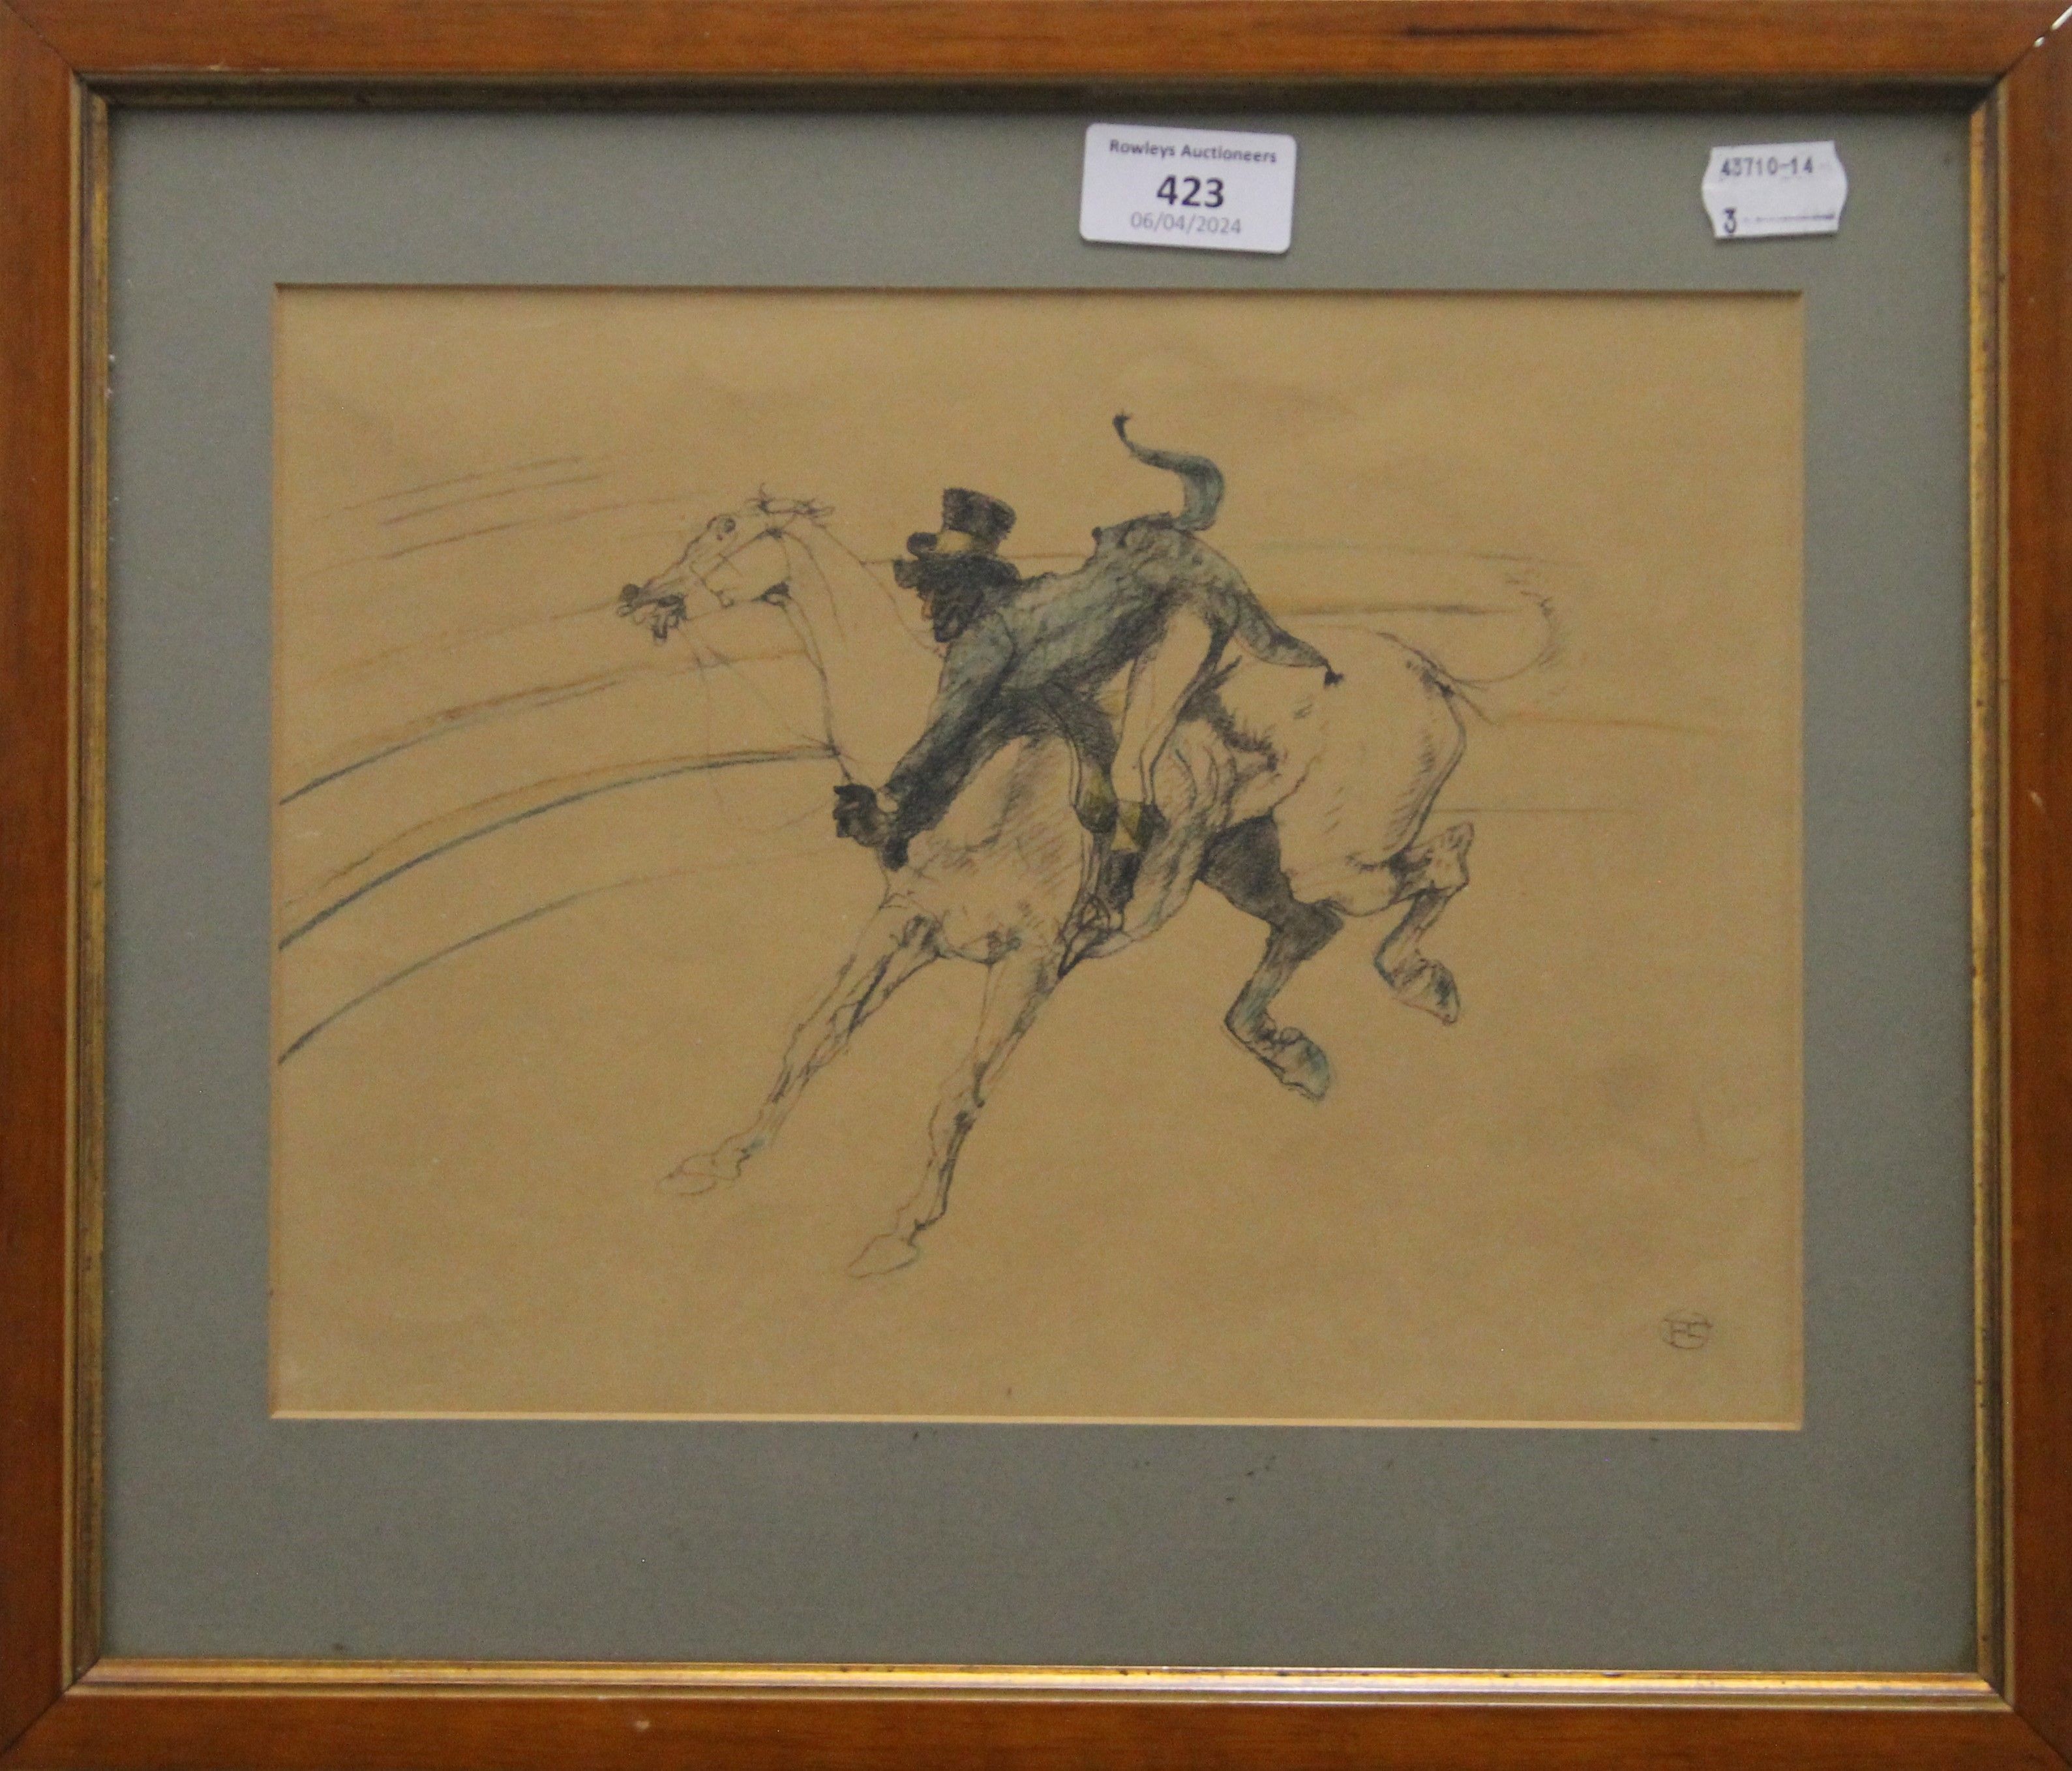 HENRI DE TOULOUSE-LAUTREC (1864-1901) French, Horse Riding, print, framed and glazed. 27.5 x 20. - Image 2 of 3